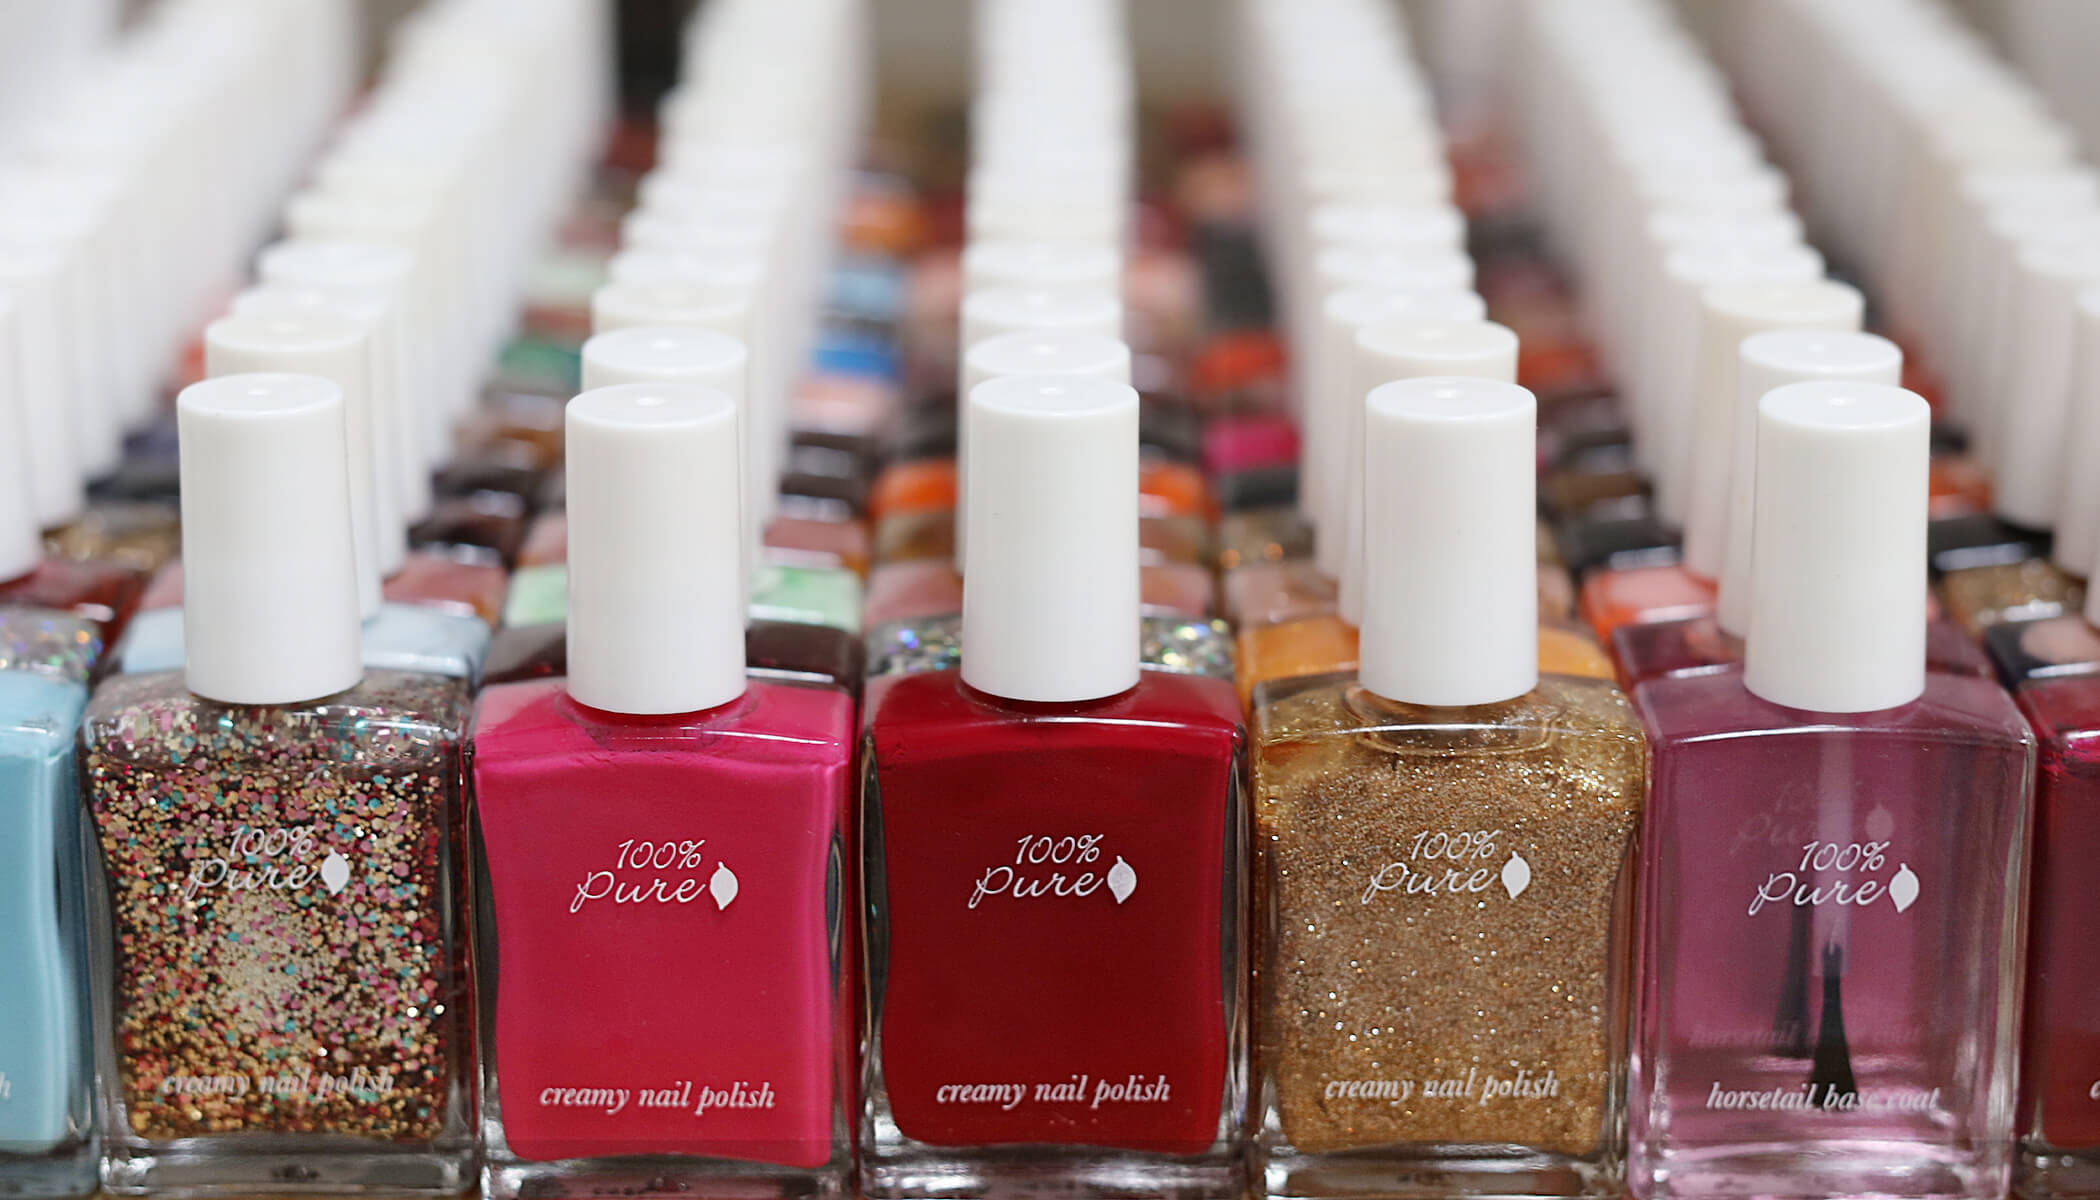 100% PURE Manicure and Pedicure Nail polishes